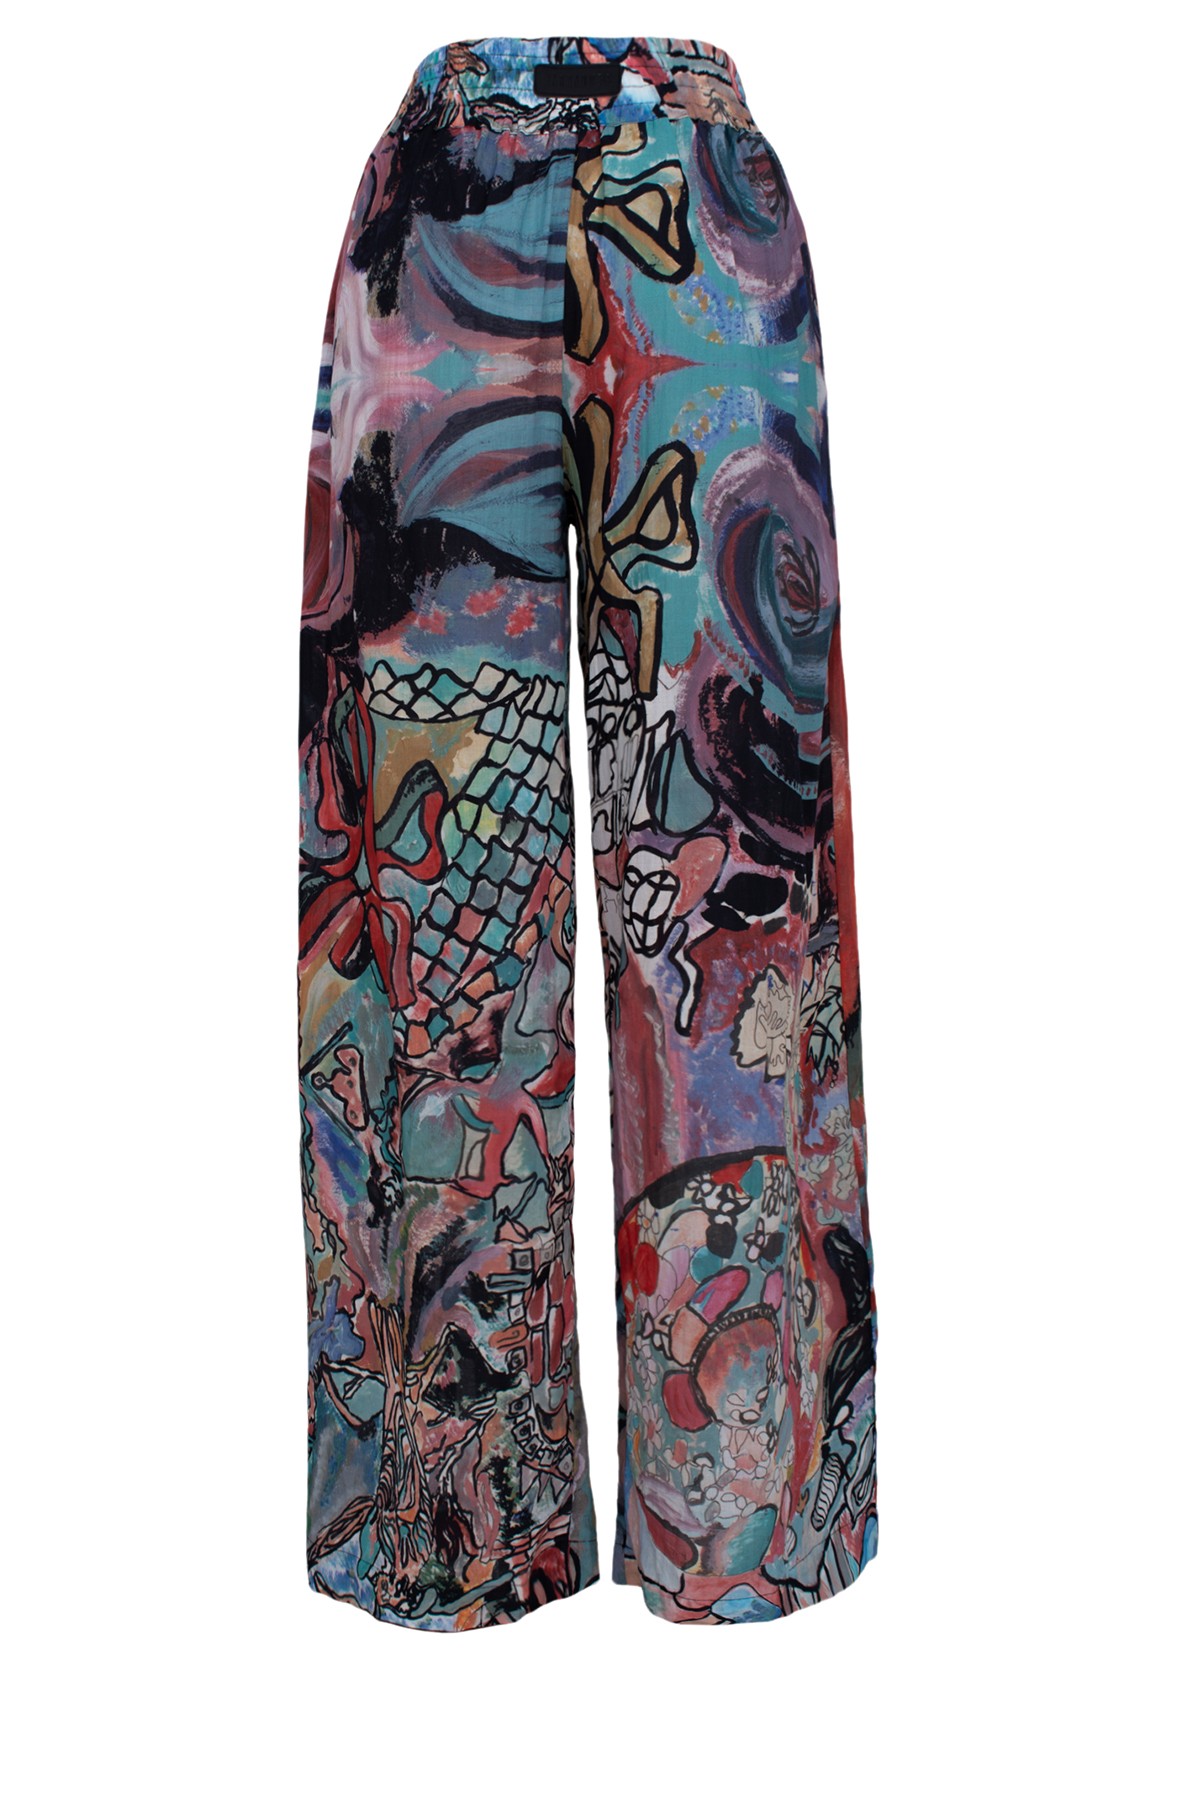 Gaudi Pattern 100% Voile Trousers